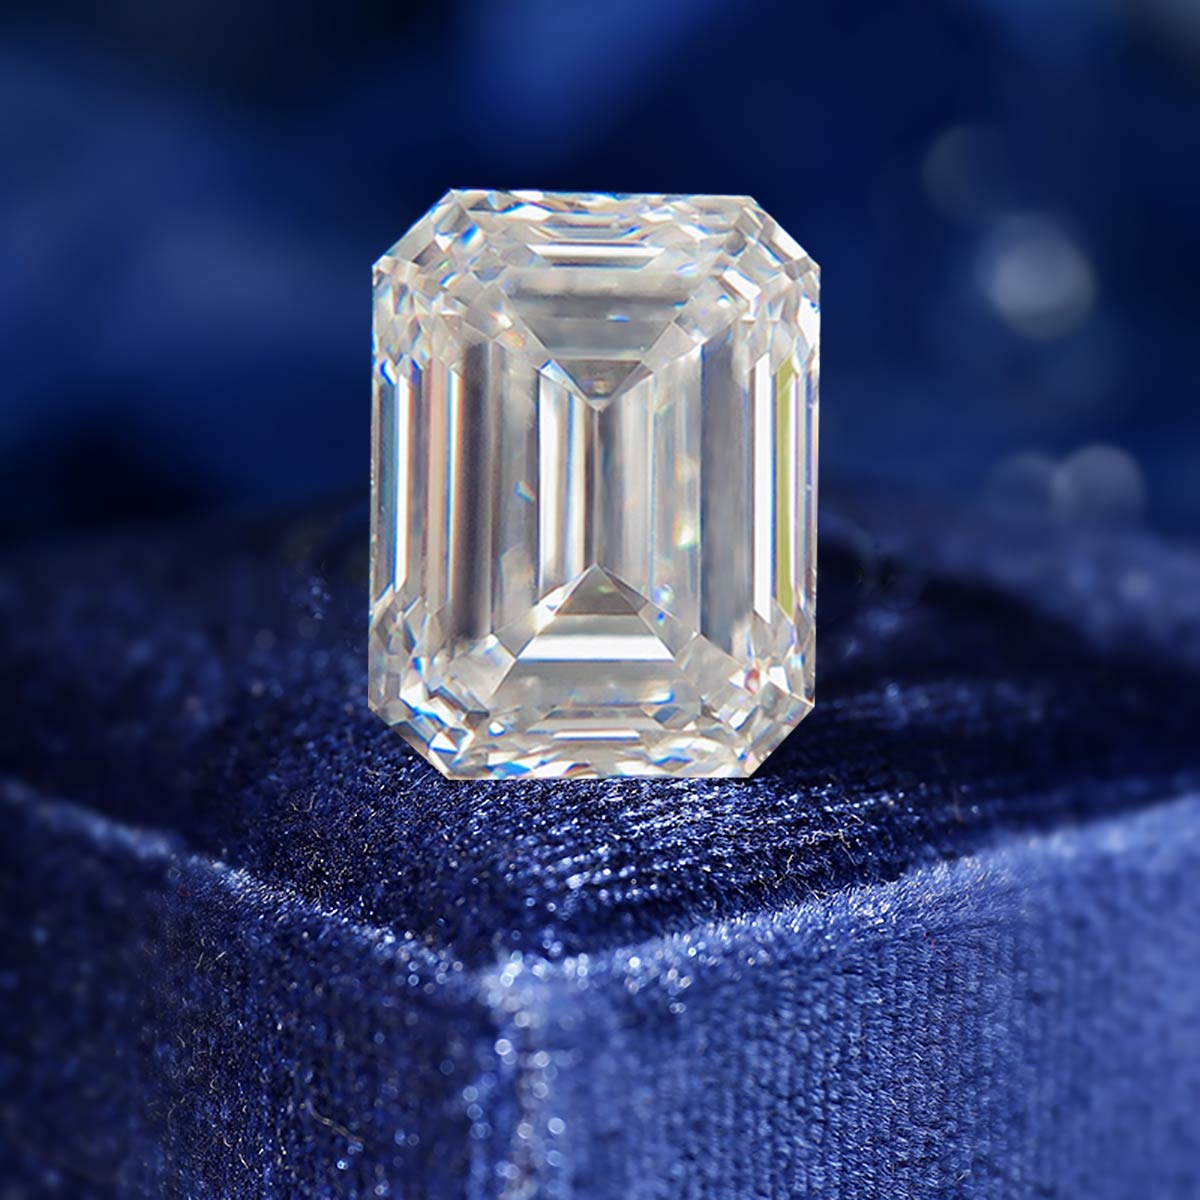 Emerald Cut. Moissanite Gemstones. From 0.20 to 10.0 Carats. D VVS1.